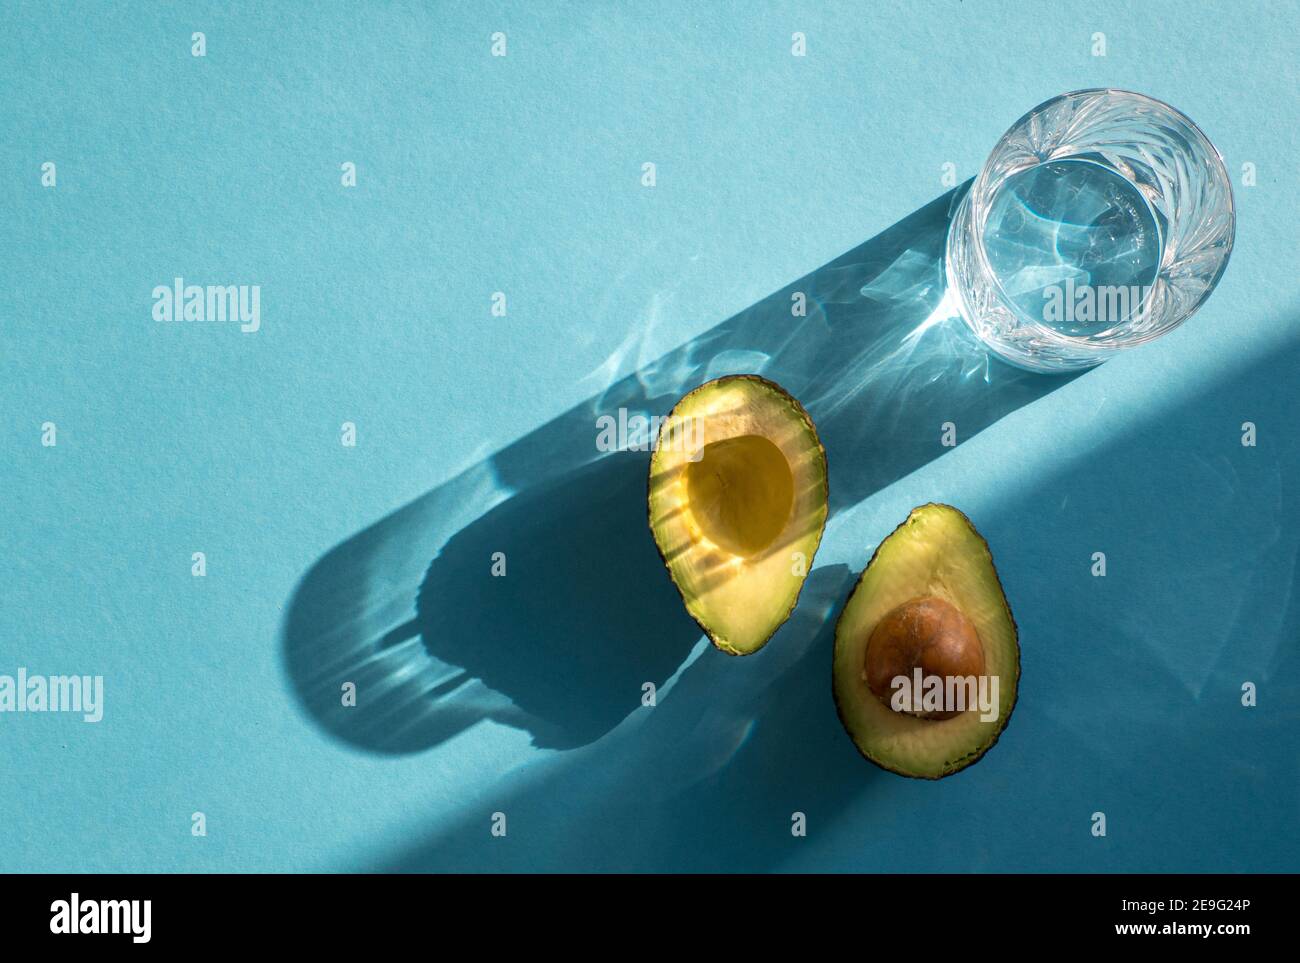 Halved Avocado and a glass of water isolated on blue coloured background Stock Photo